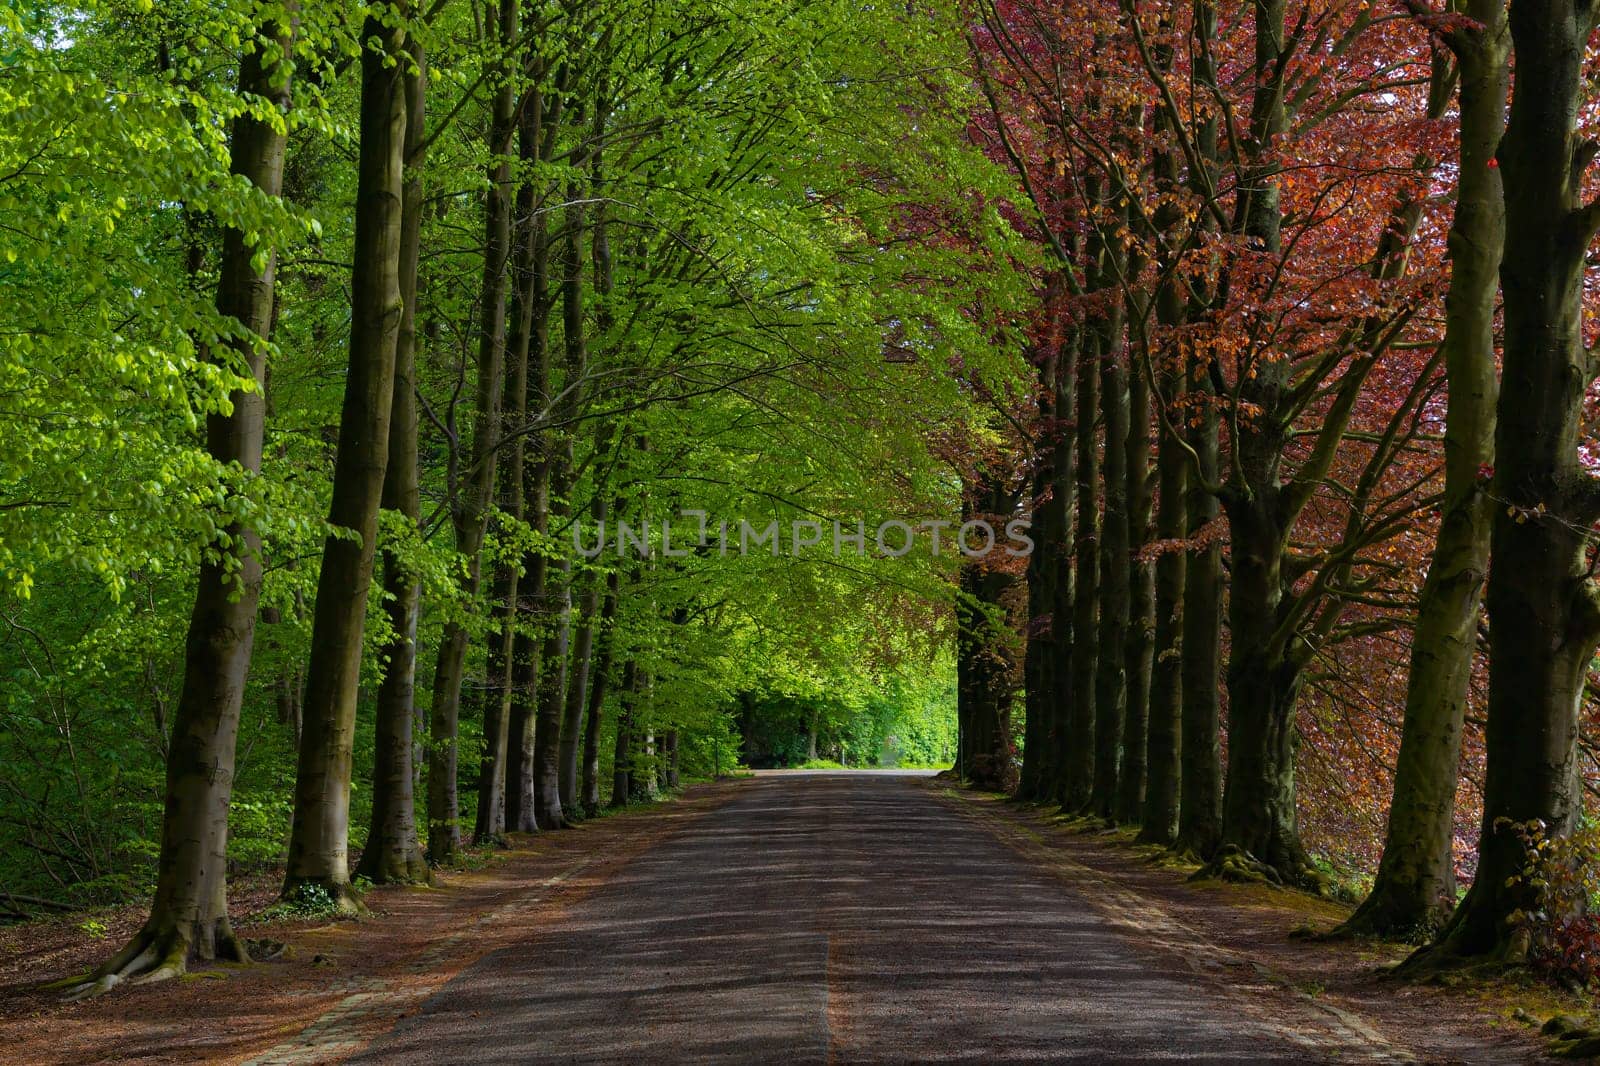 A road lined with trees is shown in the image by exndiver